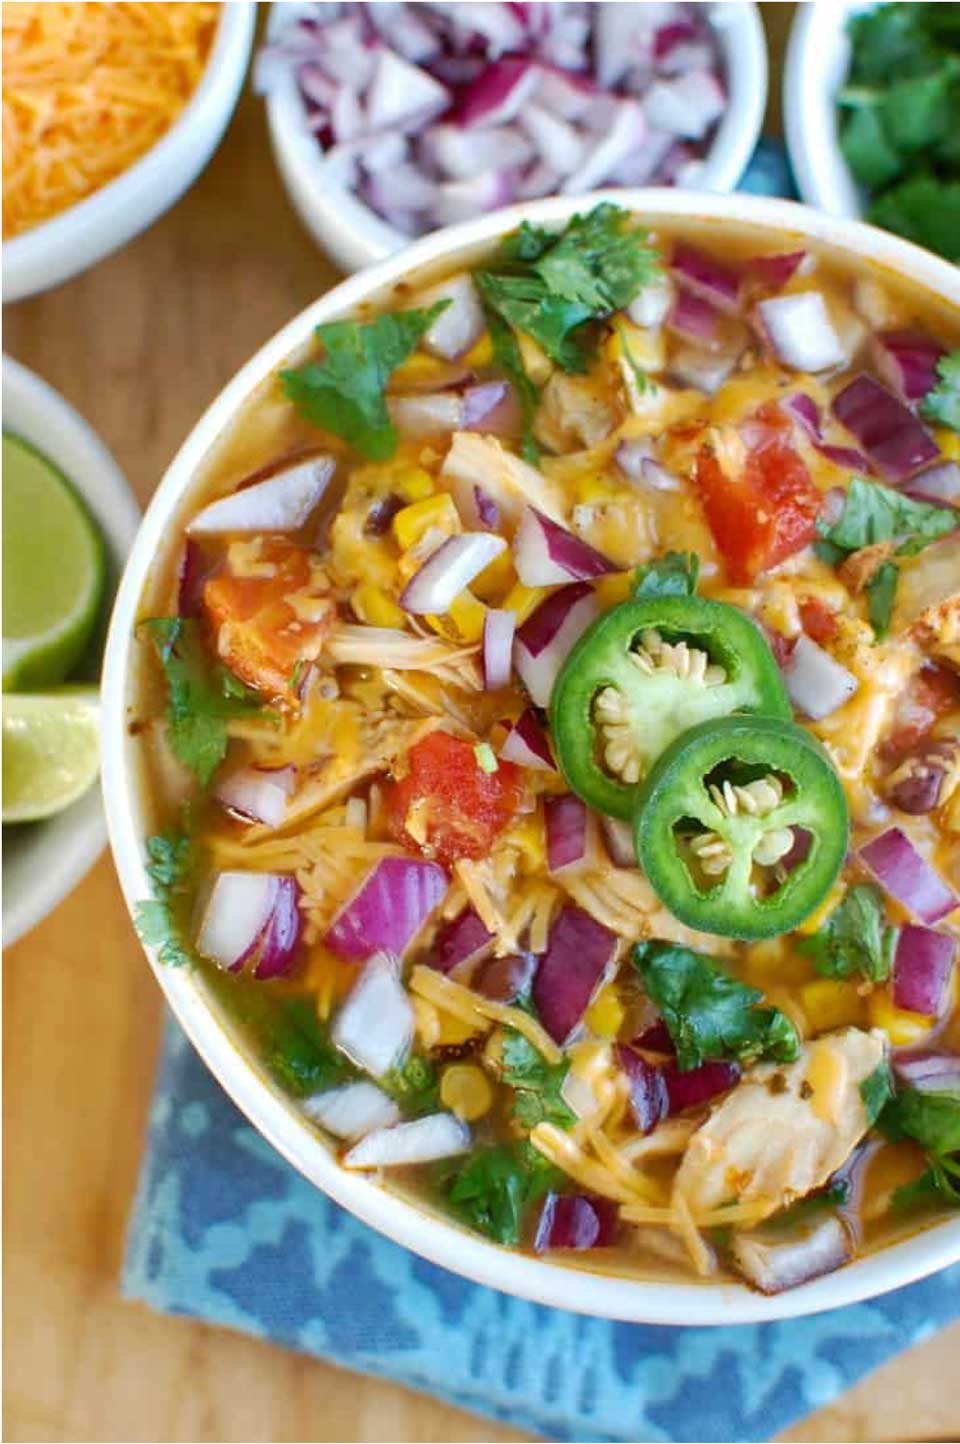 A yummy twist on chicken soup that’s perfect for Taco Tuesday … Instant Pot Chicken Tortilla Soup from Julia at A Cedar Spoon! Check out all our Instant Pot Chicken Soup recipes for lots more great ideas!